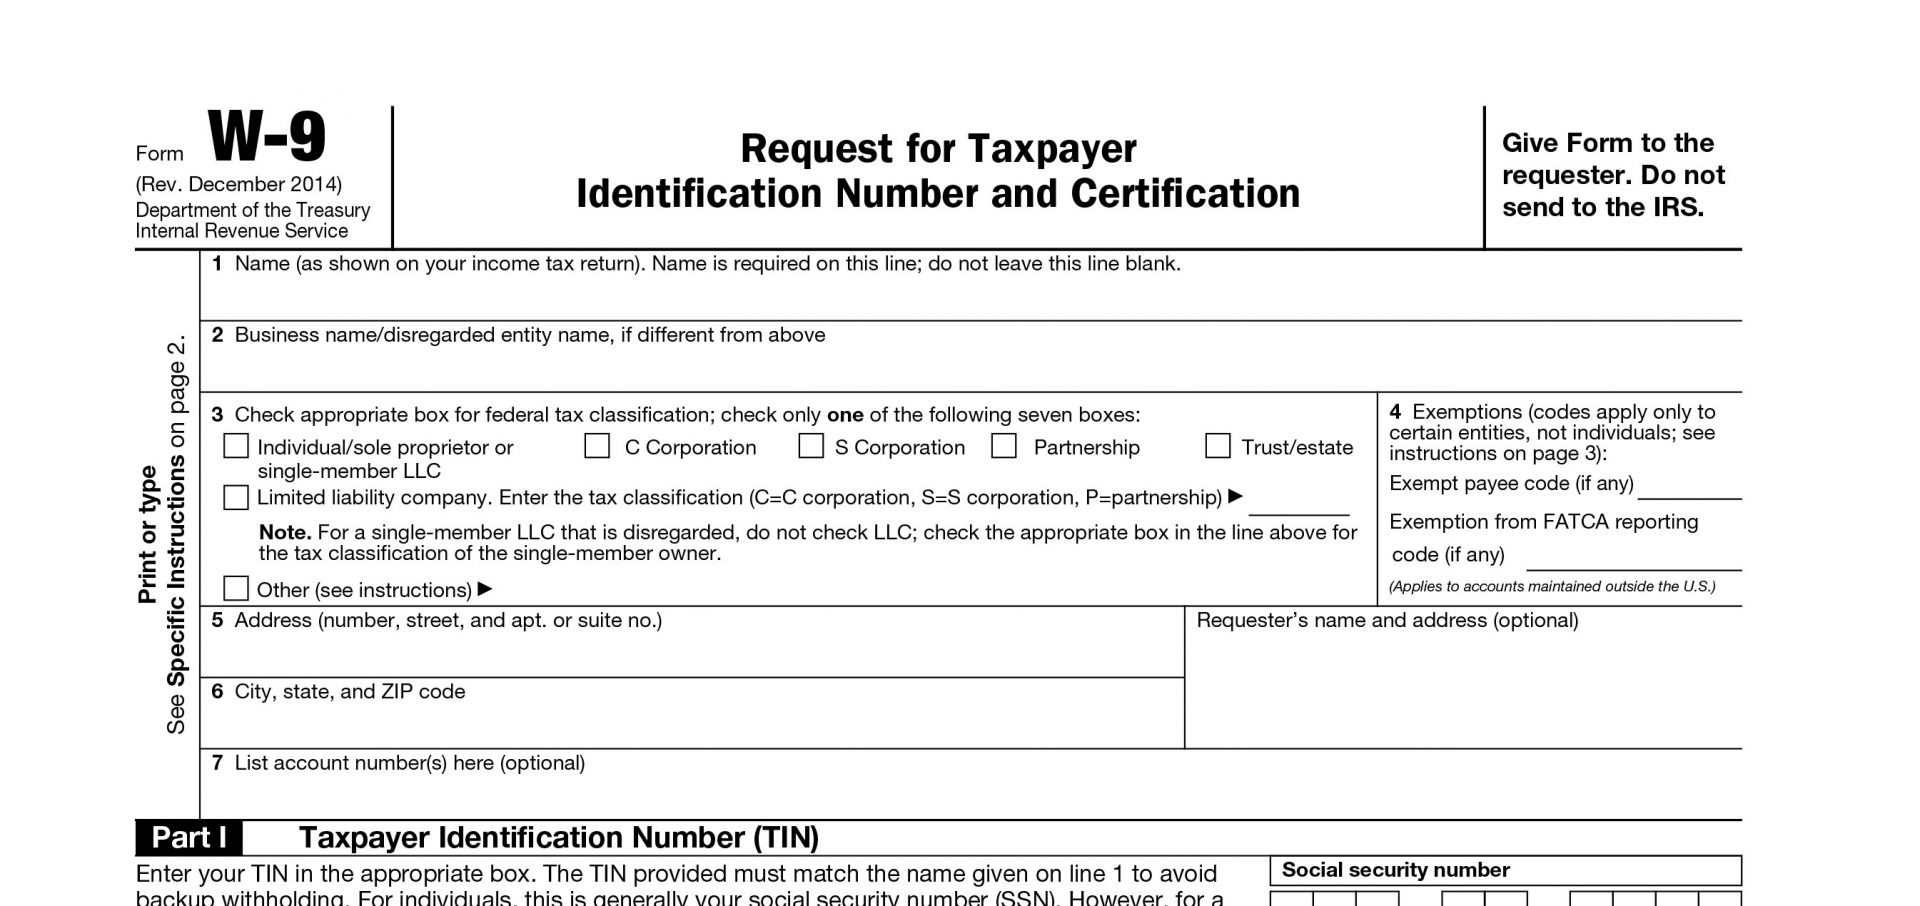 Printable Irs W-9 Blank 2019 - 2020 For Free Use-Blank 2020 W9 Form